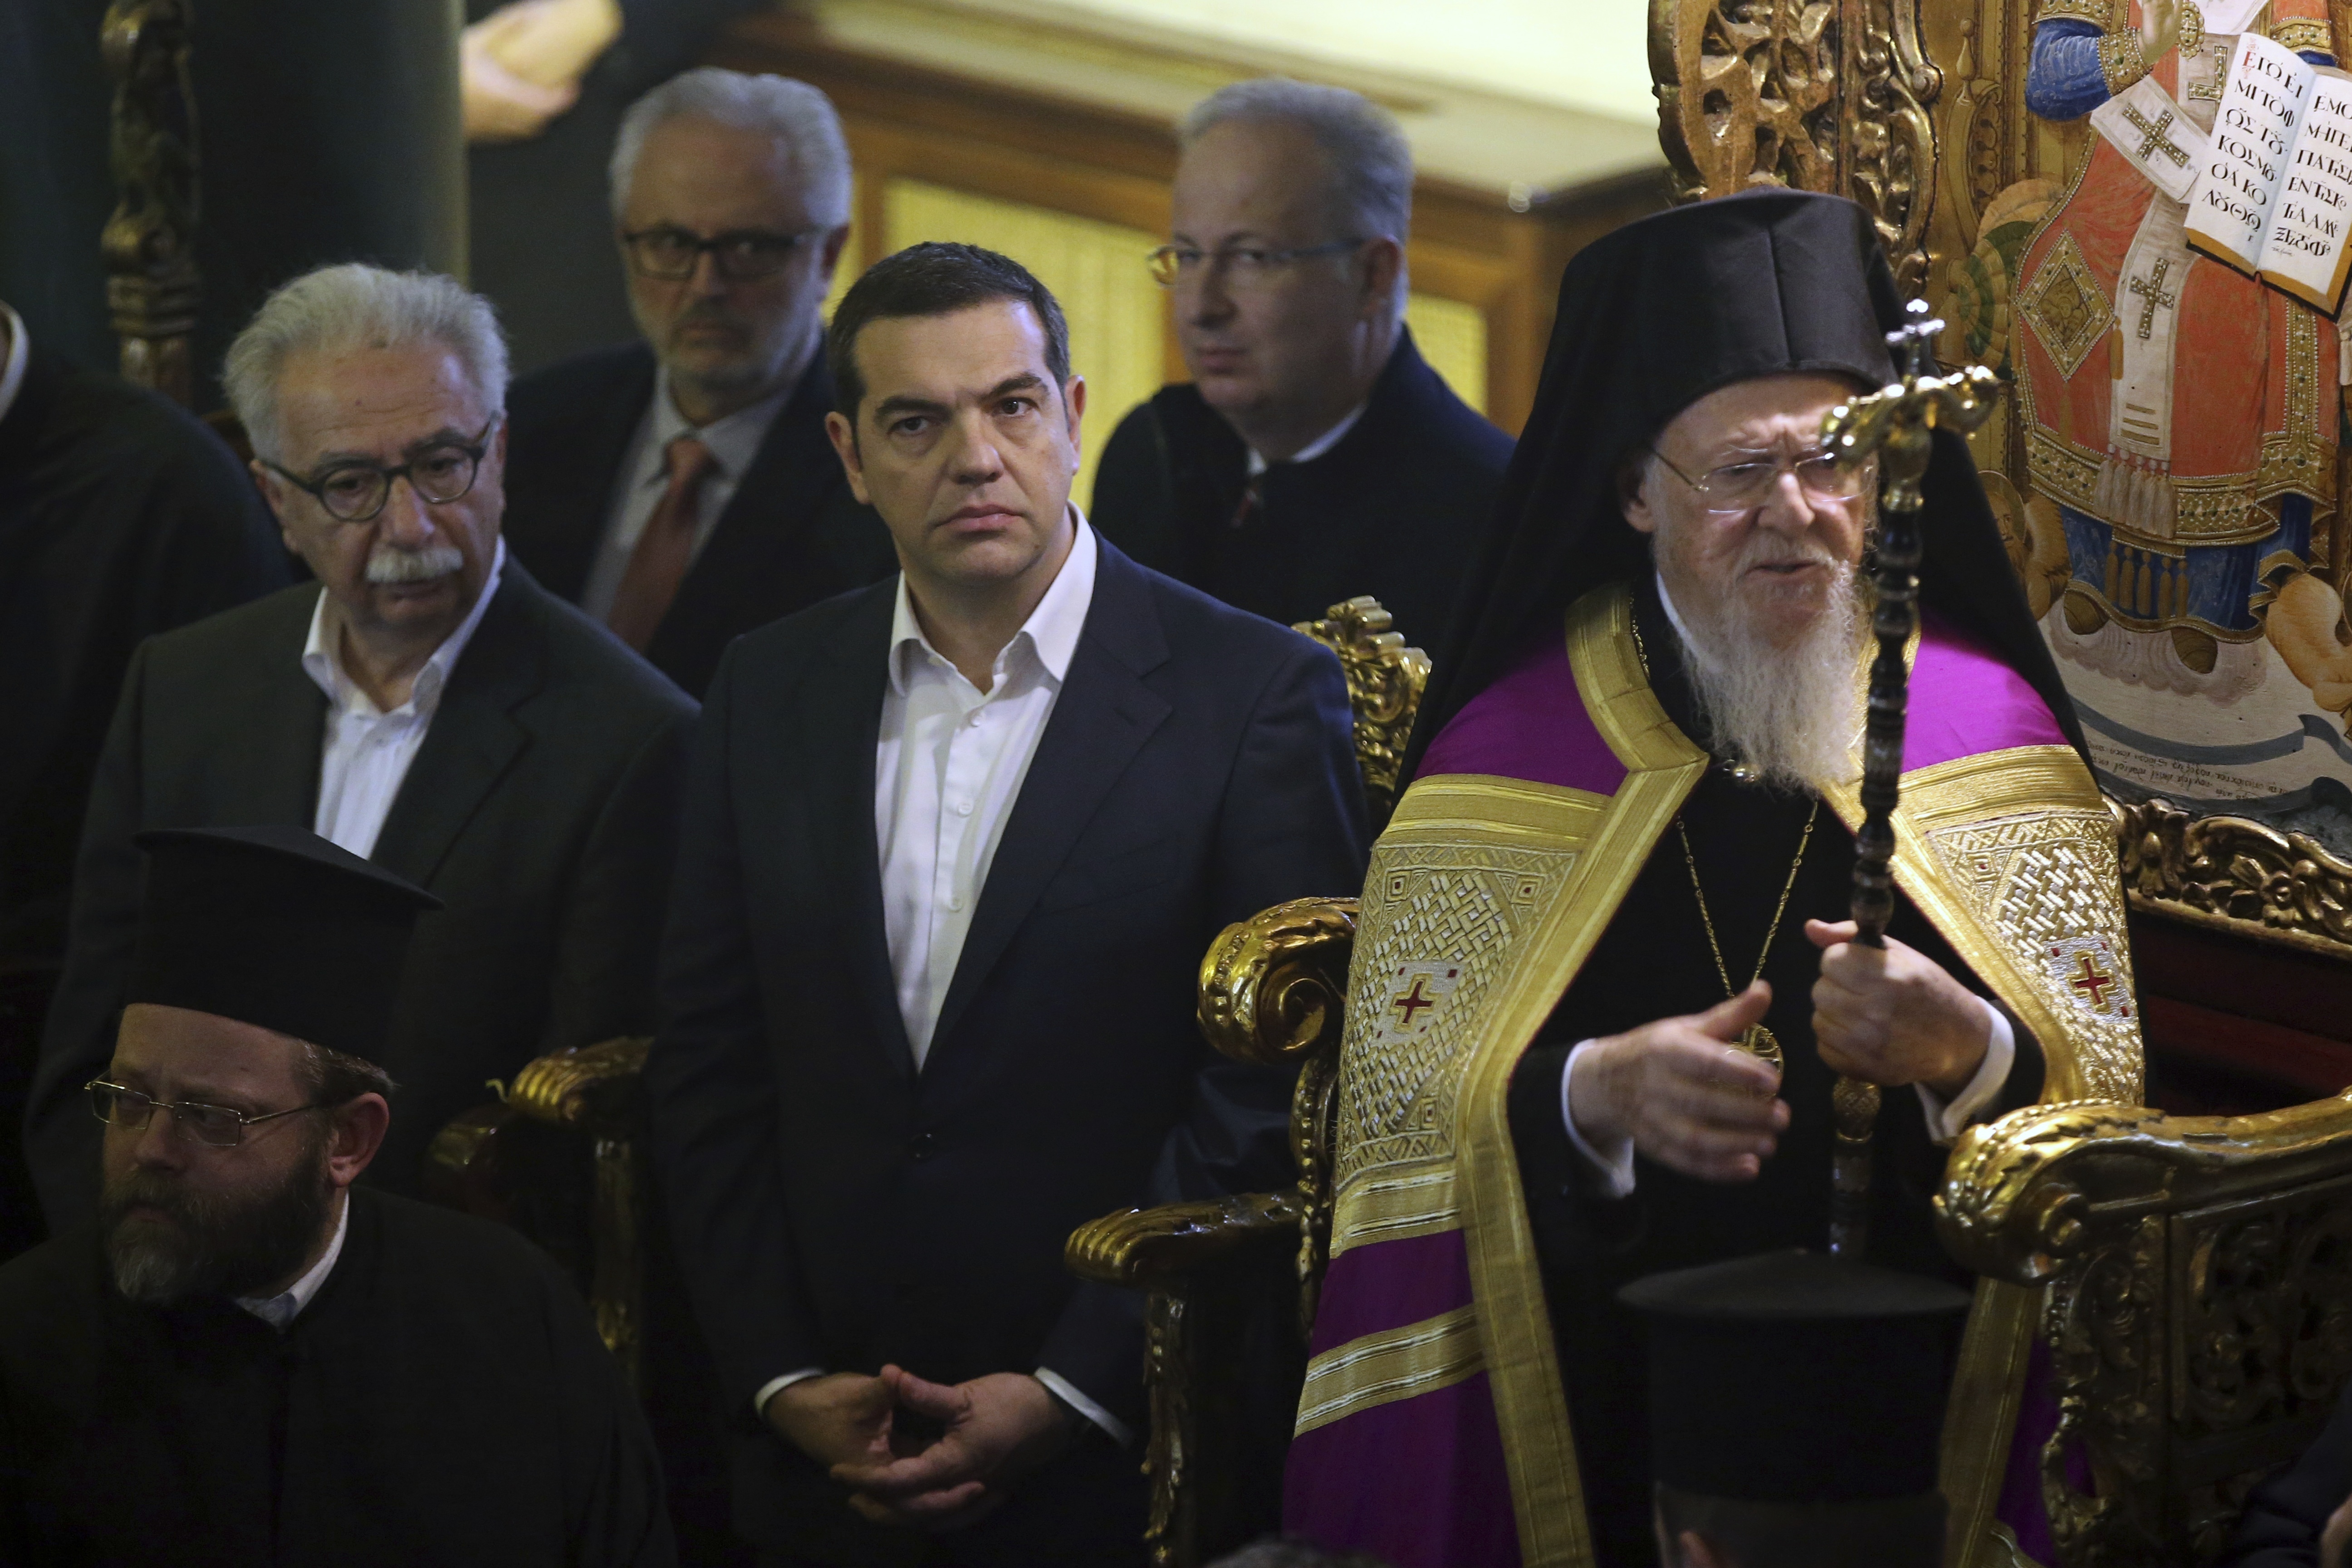 Ecumenical Patriarch Bartholomew I, right, and Greece's Prime Minister Alexis Tsipras, center, attend a church service during their visit at the Theological School of Halki, in Heybeli Island, near Istanbul, Wednesday, Feb. 6, 2019. The president of Turkey and the prime minister of Greece agreed Tuesday on the need to keep 